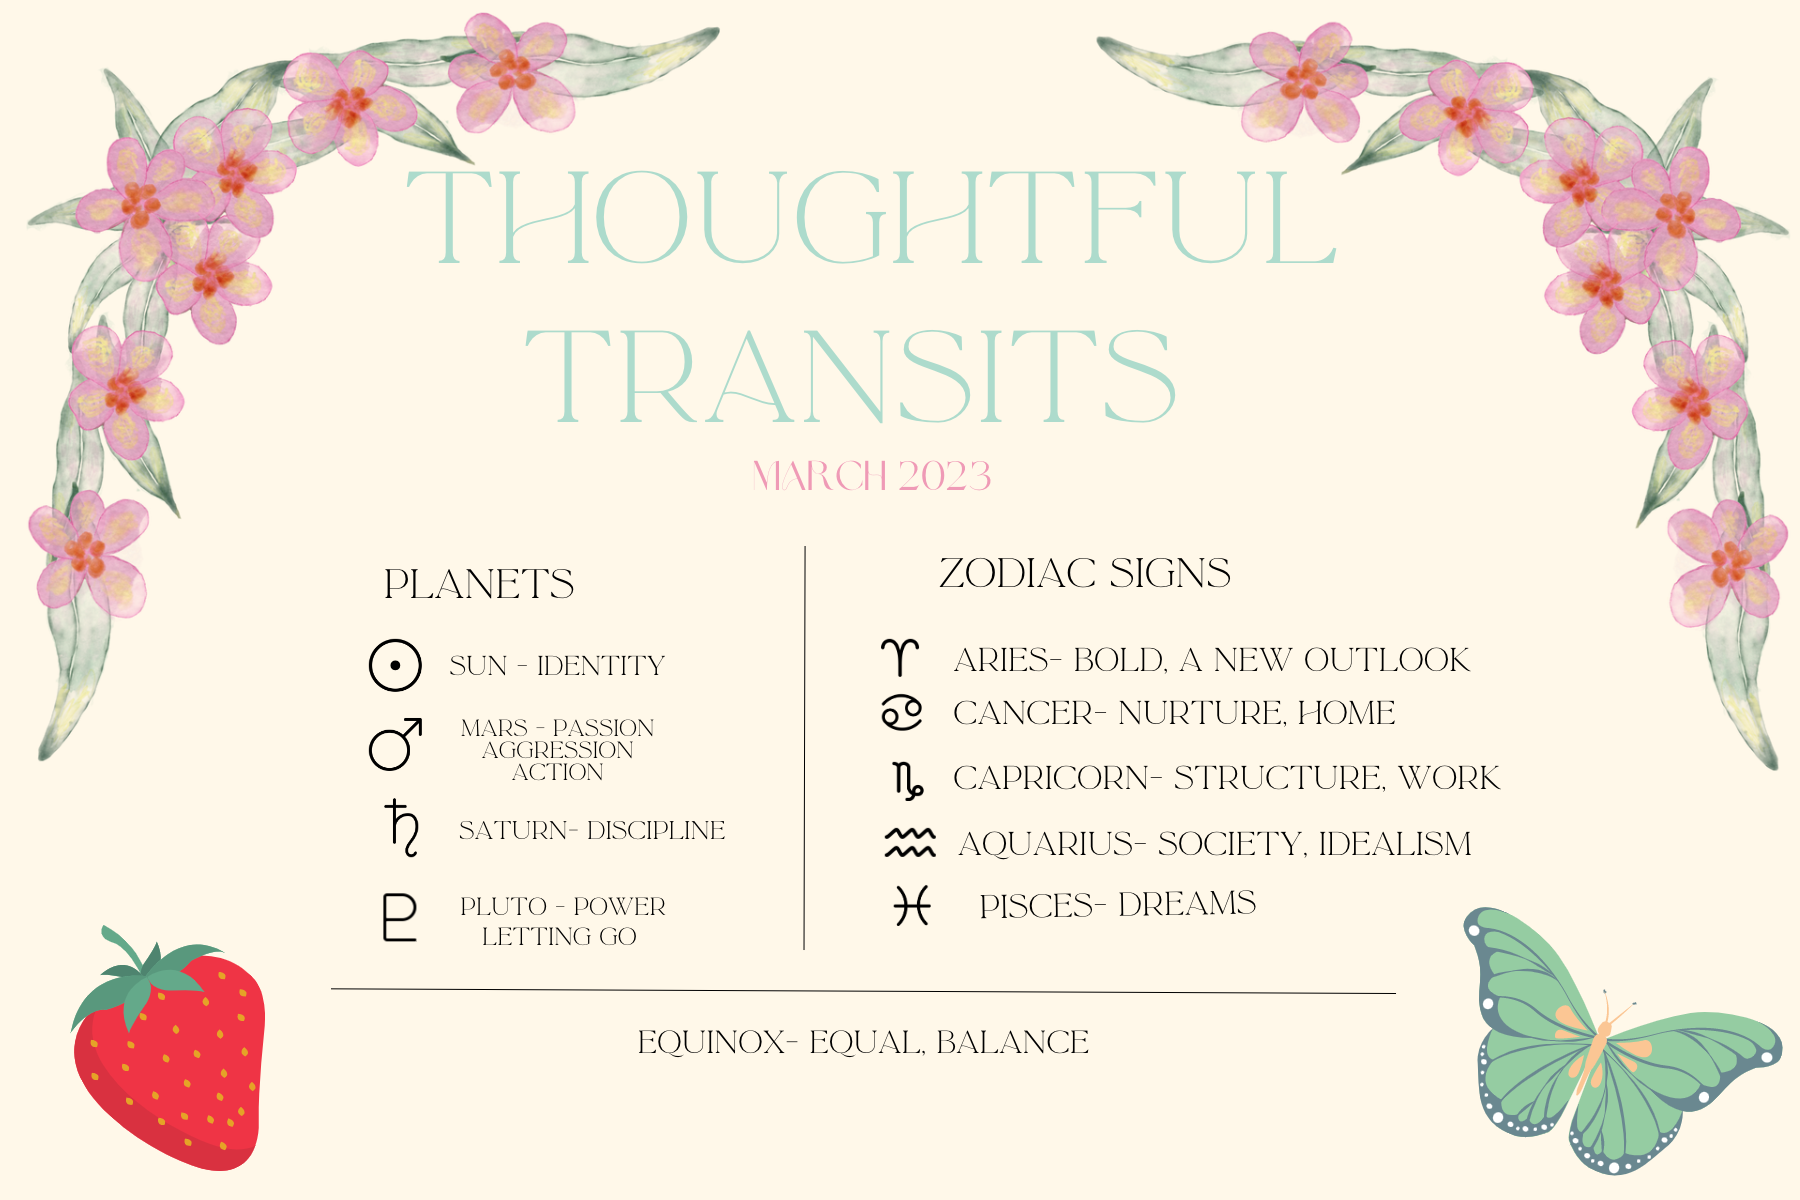 the thoughtful transits key. featuring the meanings of the zodiac, planets, and equinox.